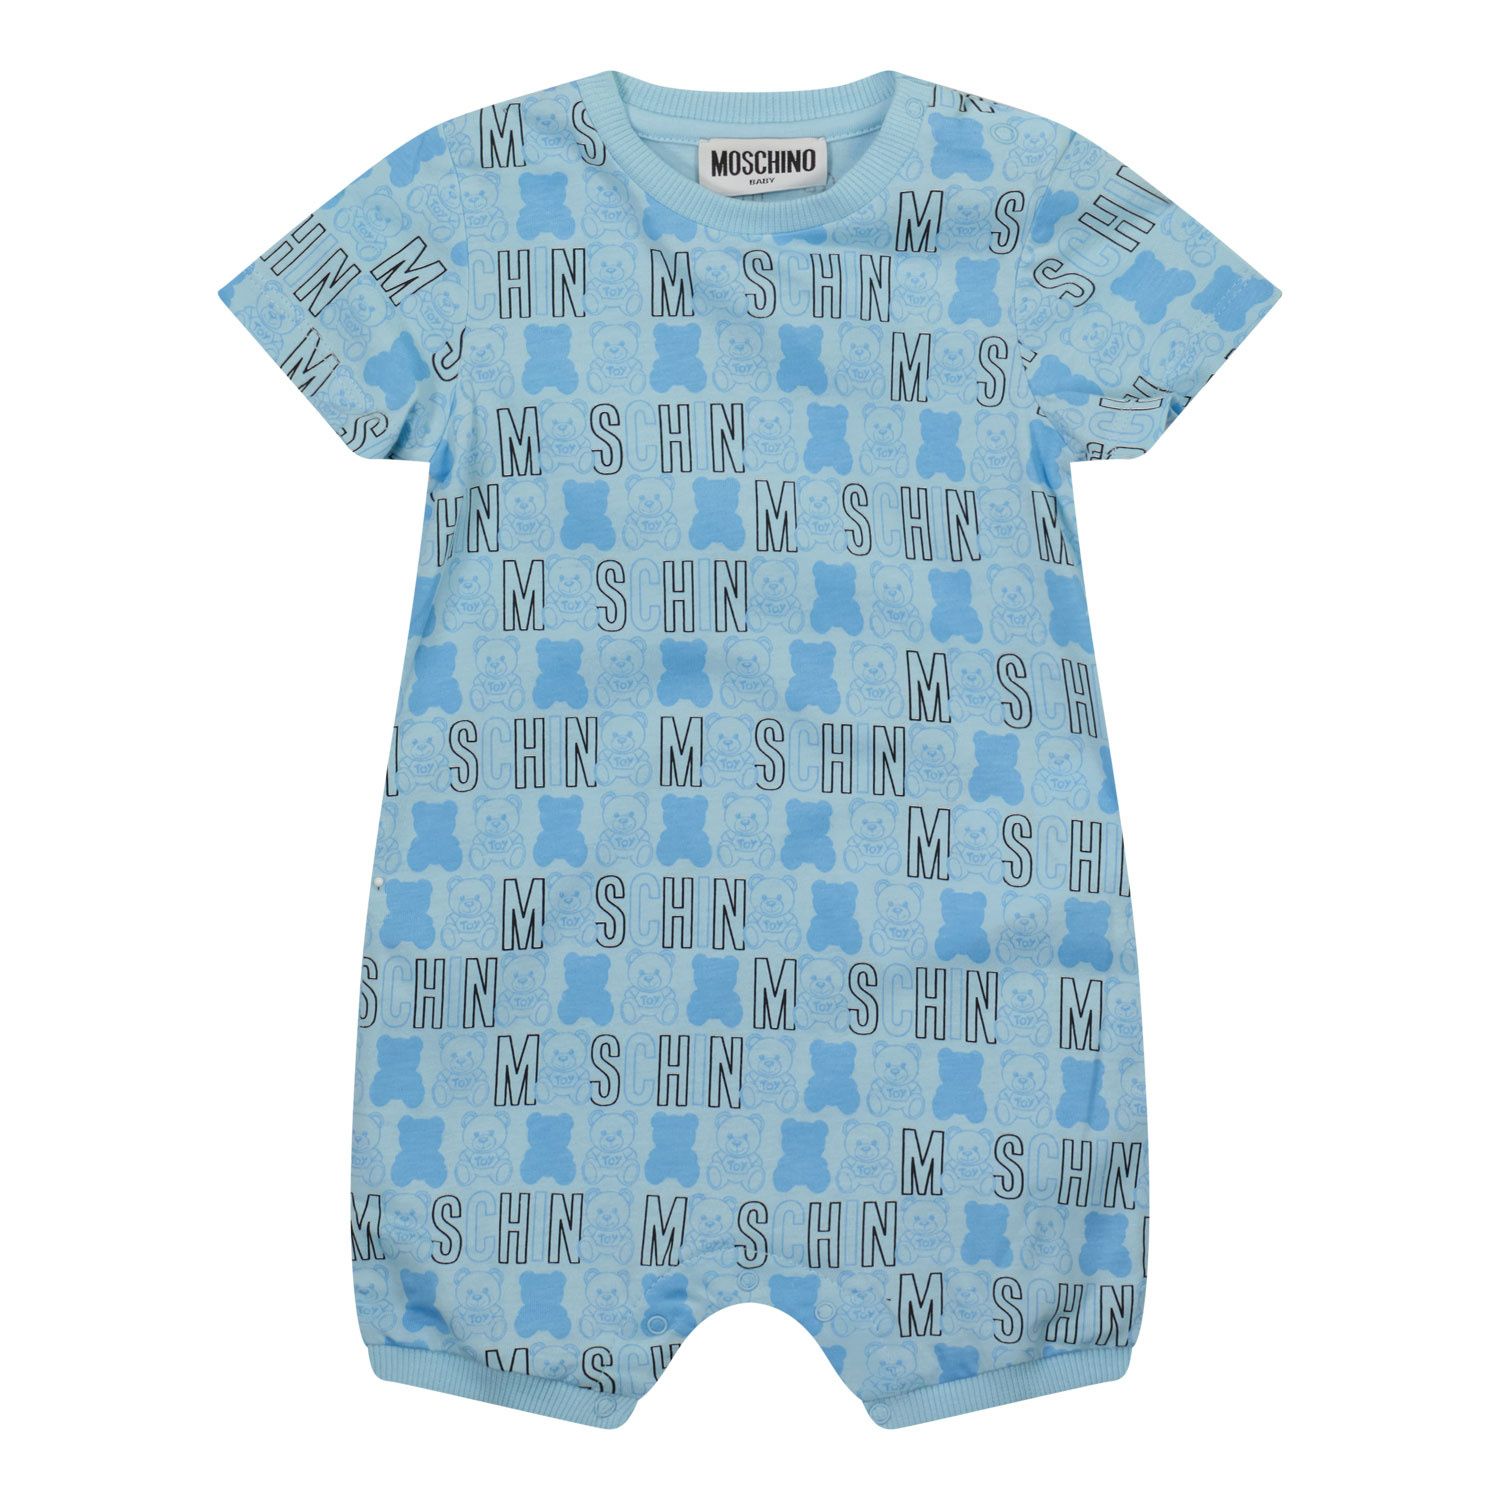 Picture of Moschino MUT02M baby playsuit light blue